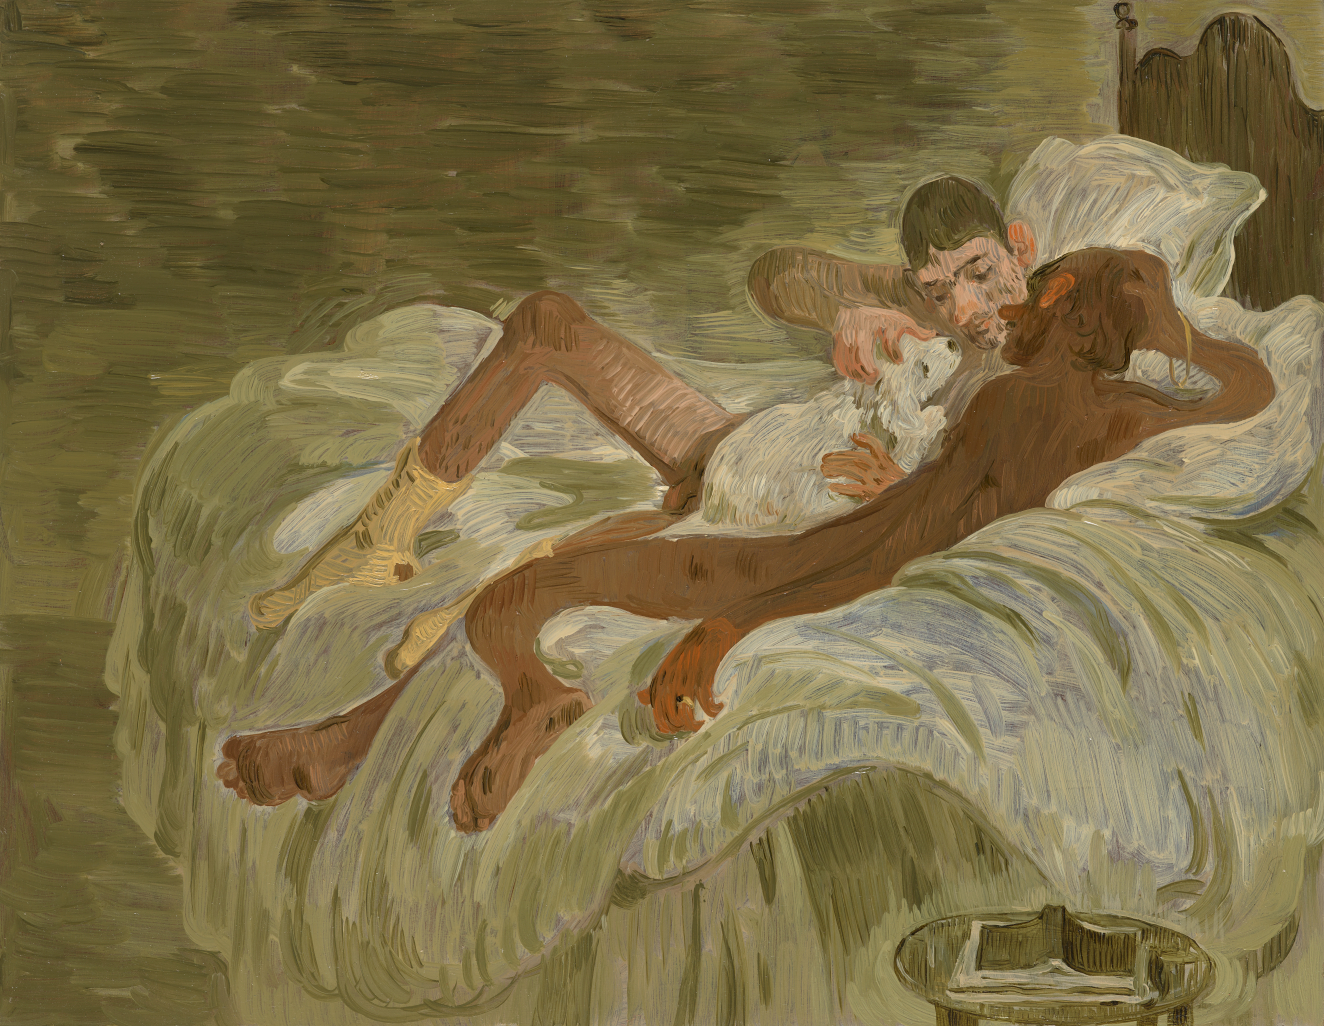 Painting of two nude young men--one dark-skinned, the other light-skinned. They relax on a bed and affectionately cuddle with a small white dog. Brushwork is loose and palette is muted.